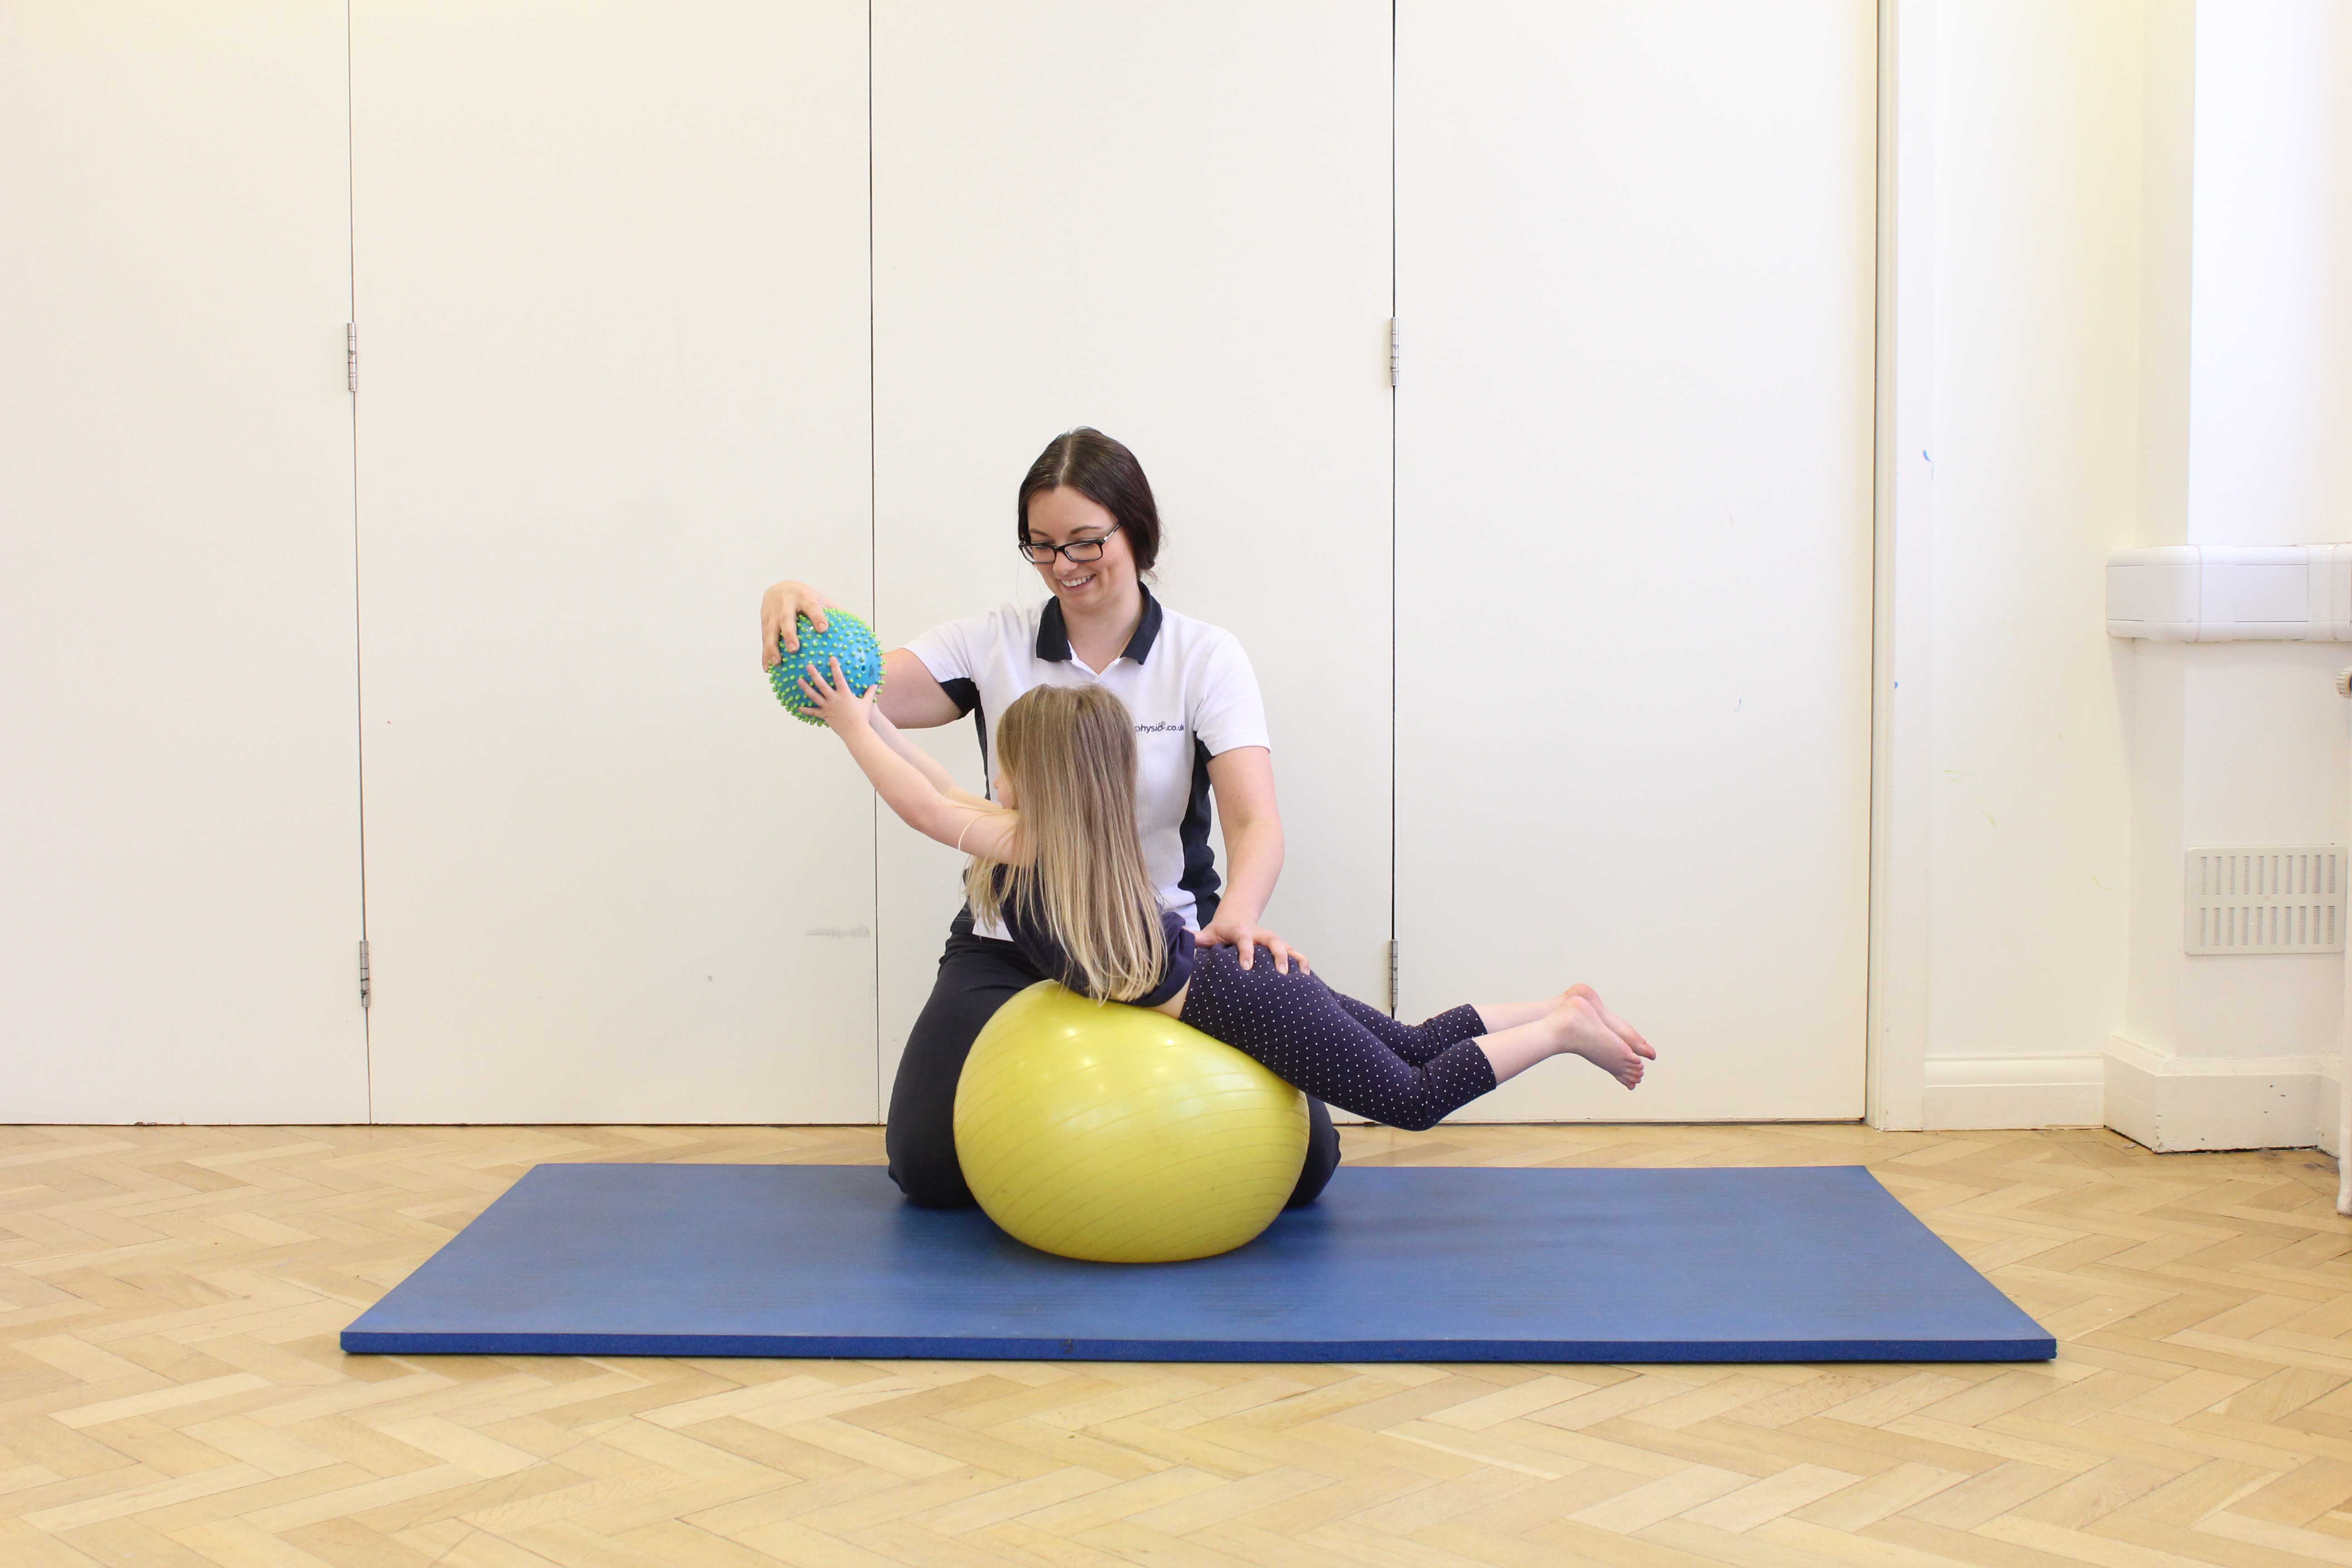 Stretching and toning exercises assisted by a paediatric physiotherapist